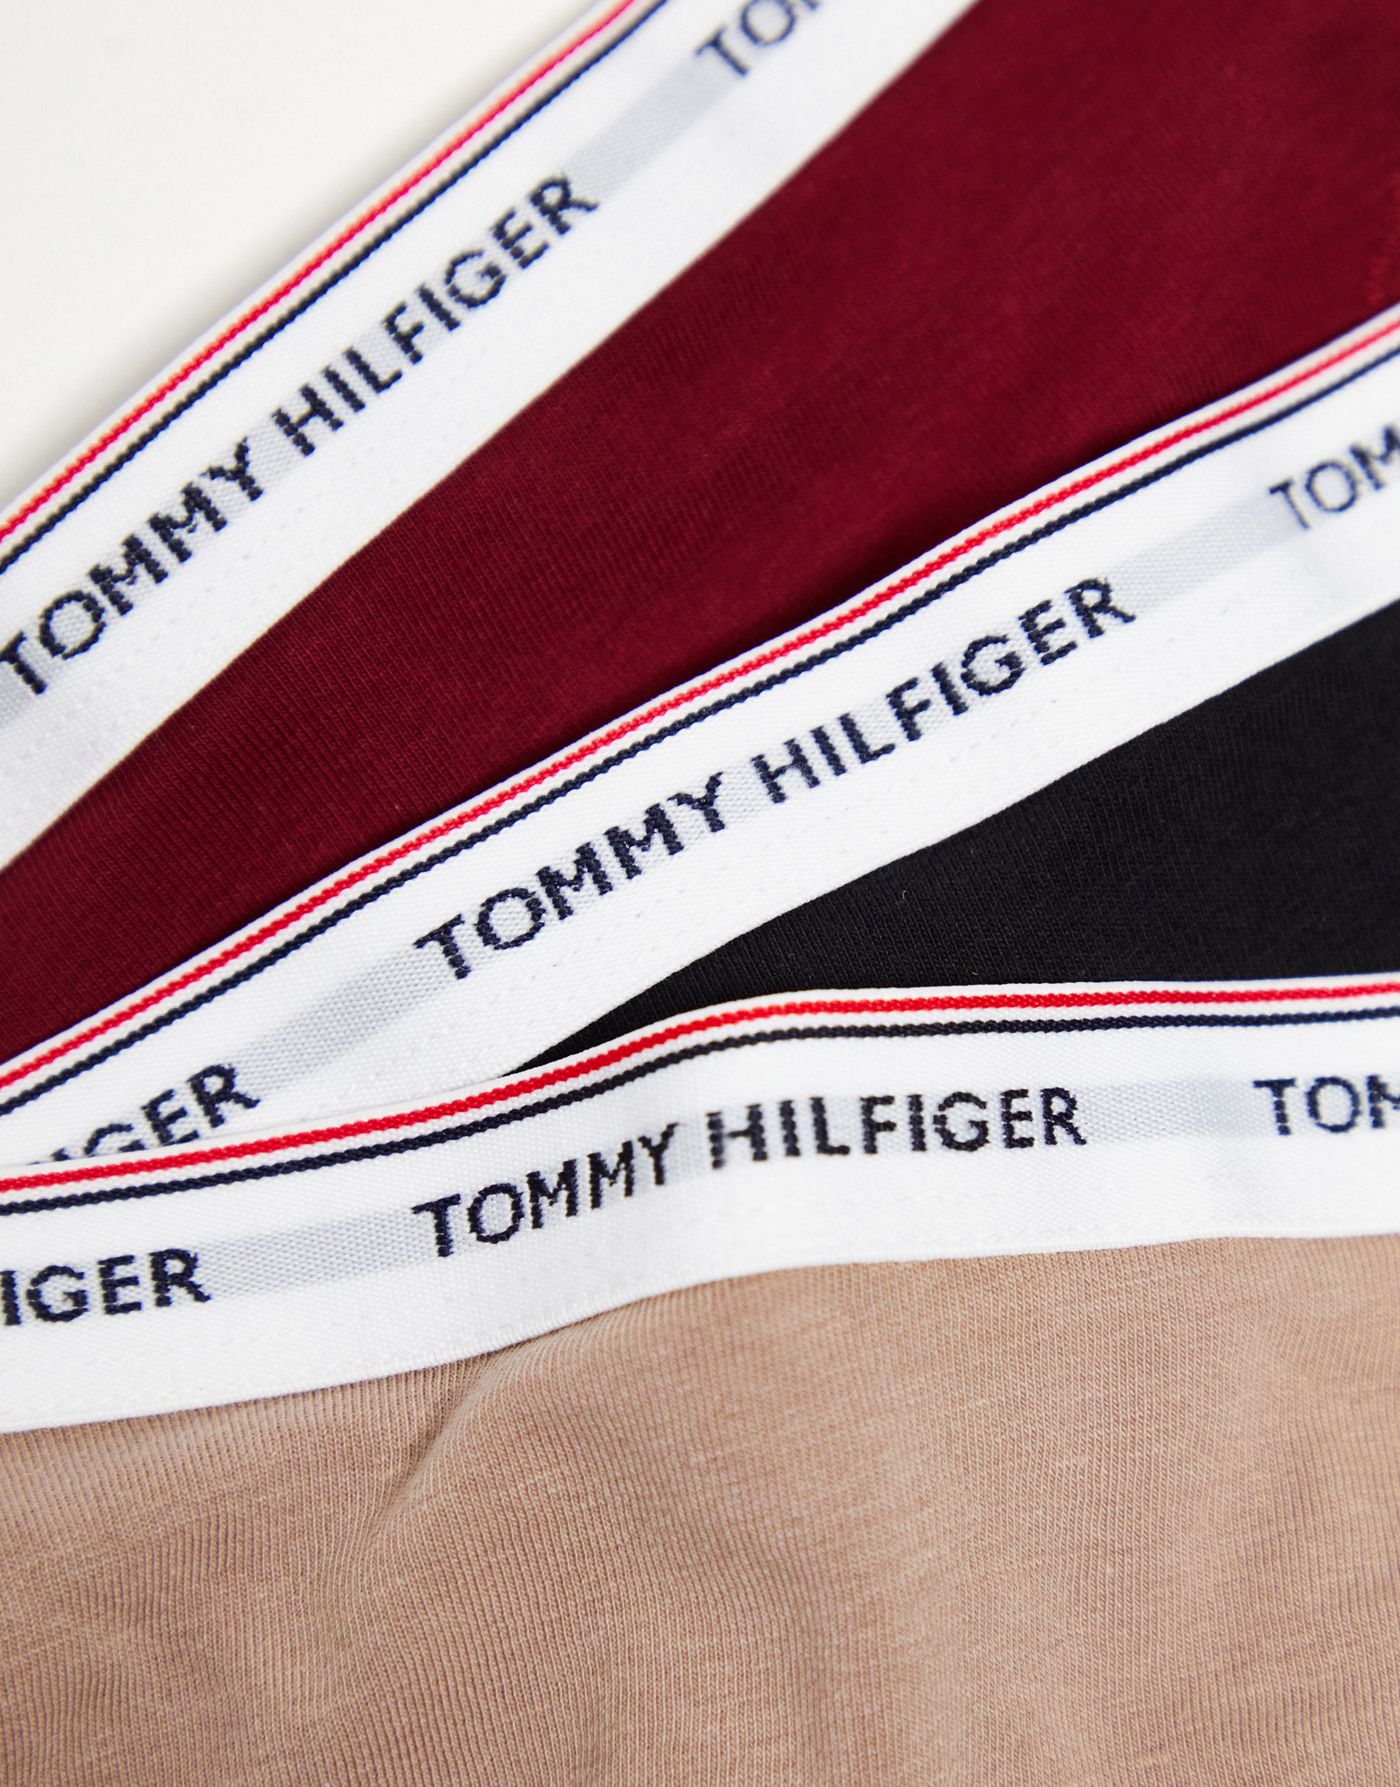 Tommy Hilfiger Premium Essentials 3-pack thong with logo waistband in multi